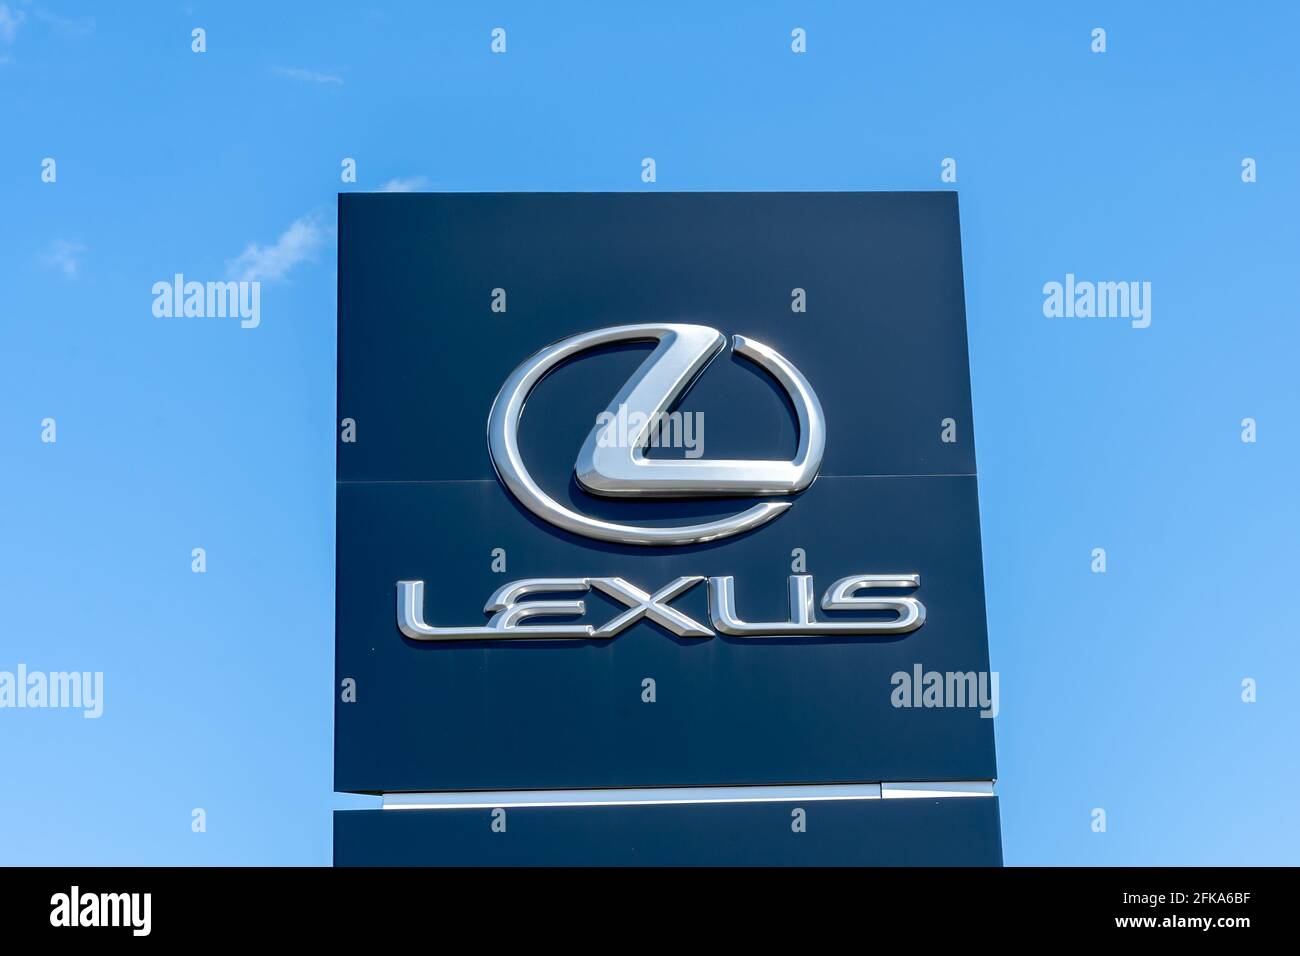 Barrie, Ontario, Canada - August 4, 2019: Close up of Lexus pole sign with blue sky in background. Stock Photo